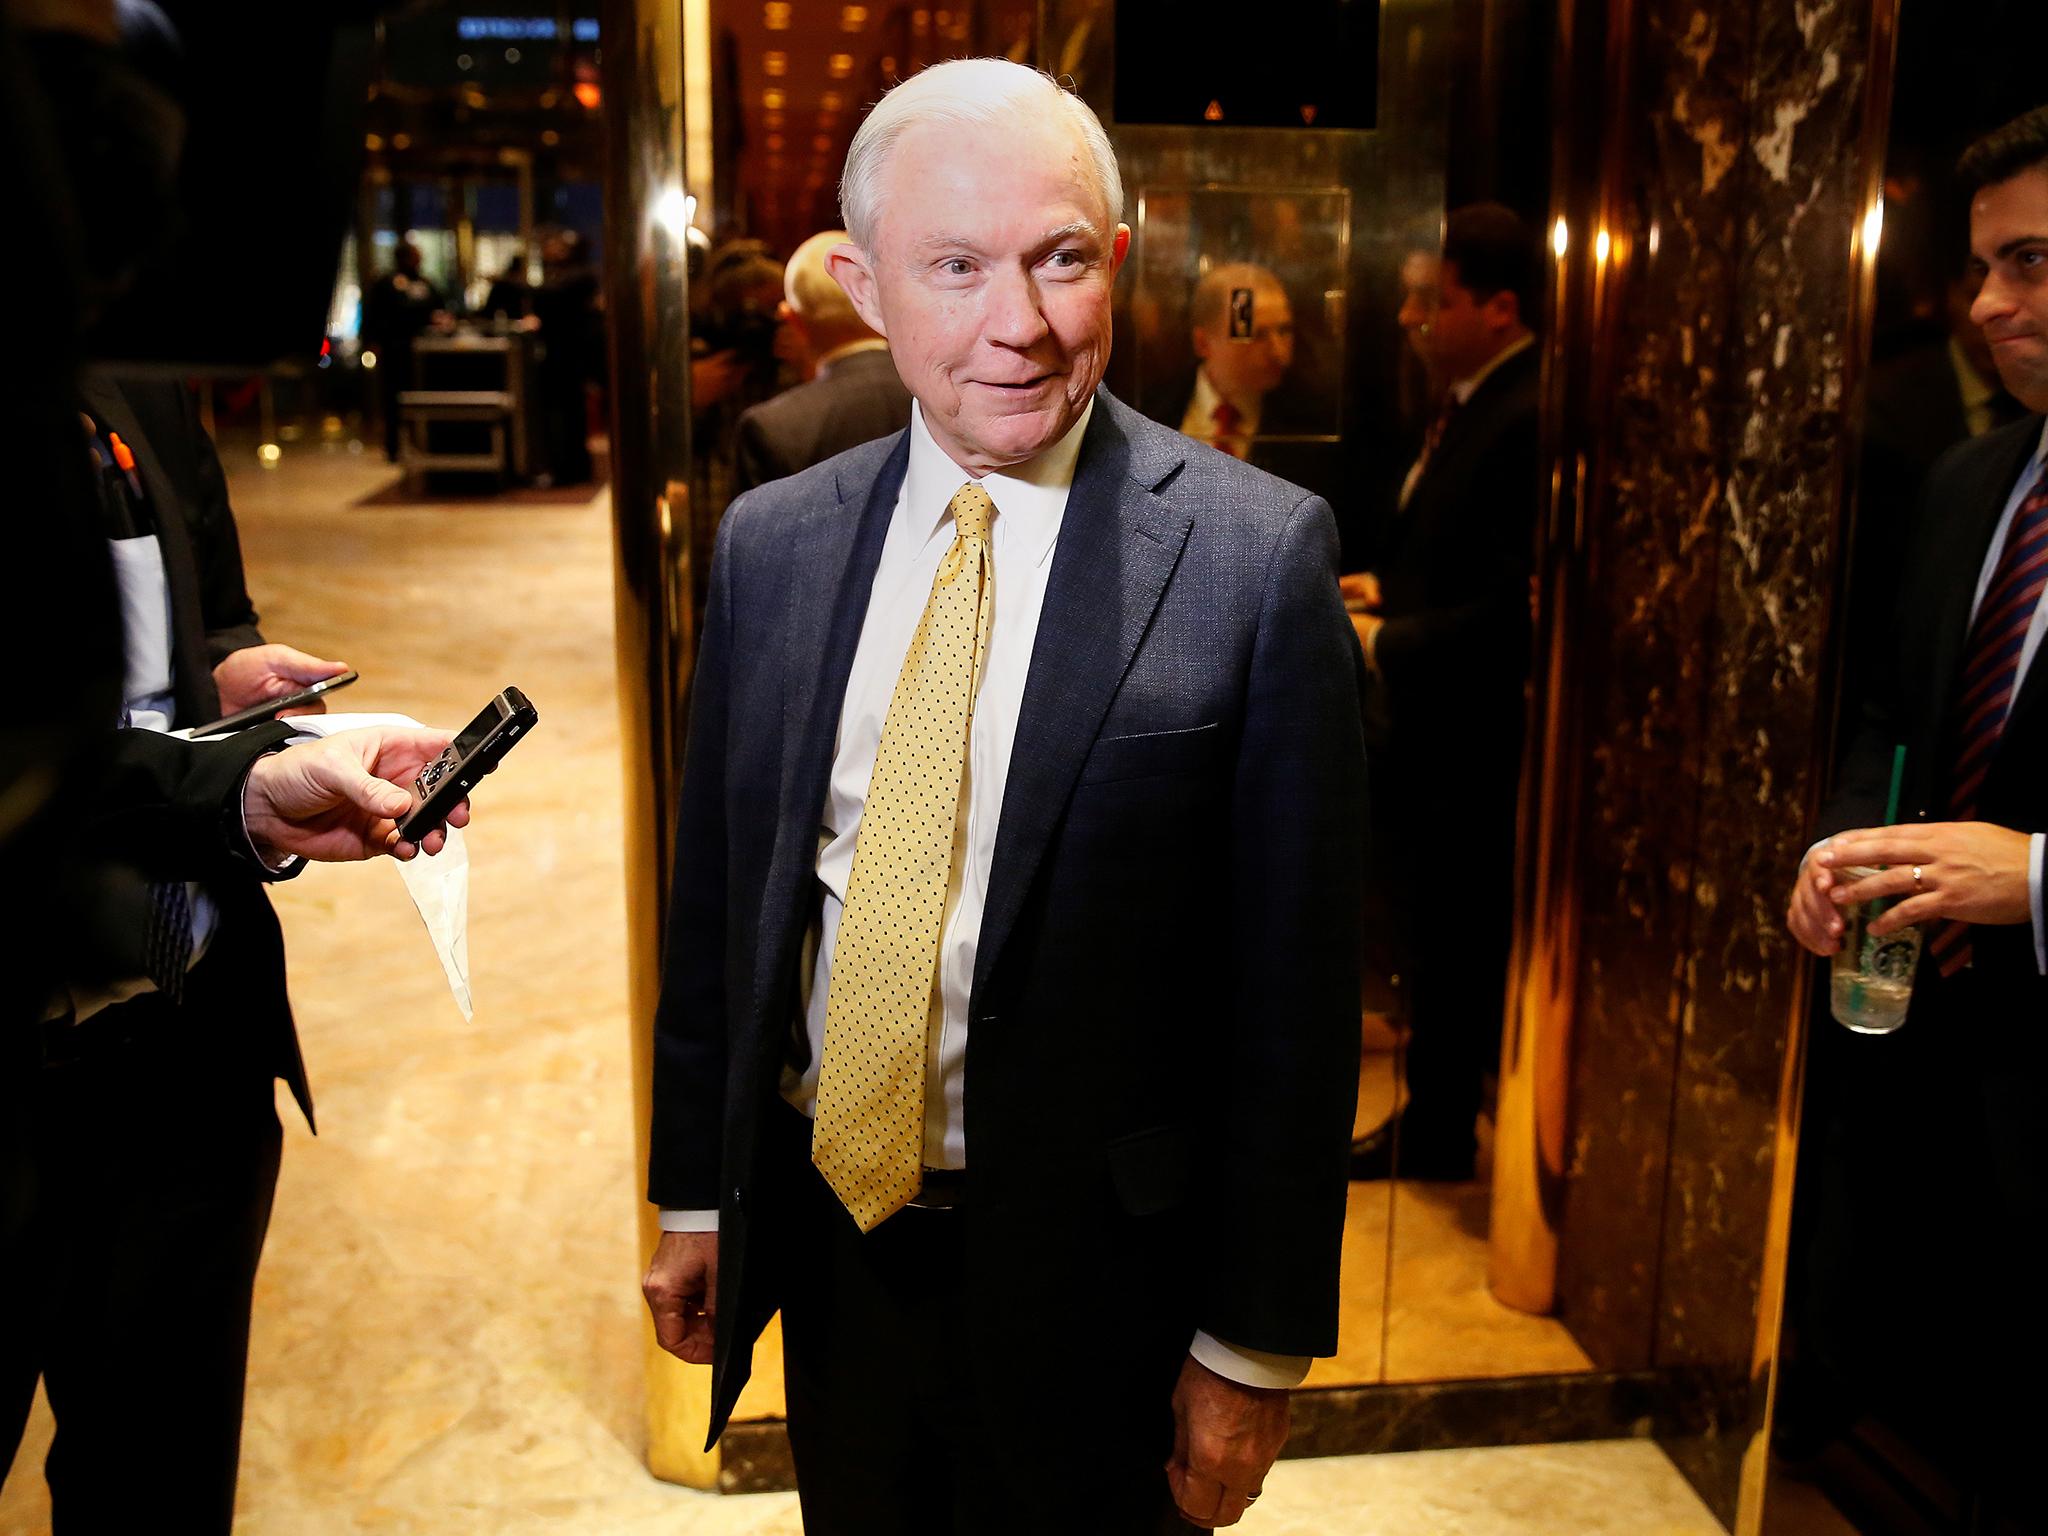 Jeff Sessions, pictured after meeting with Donald Trump at Trump Tower, was accused of showing "gross insensitivity to black people